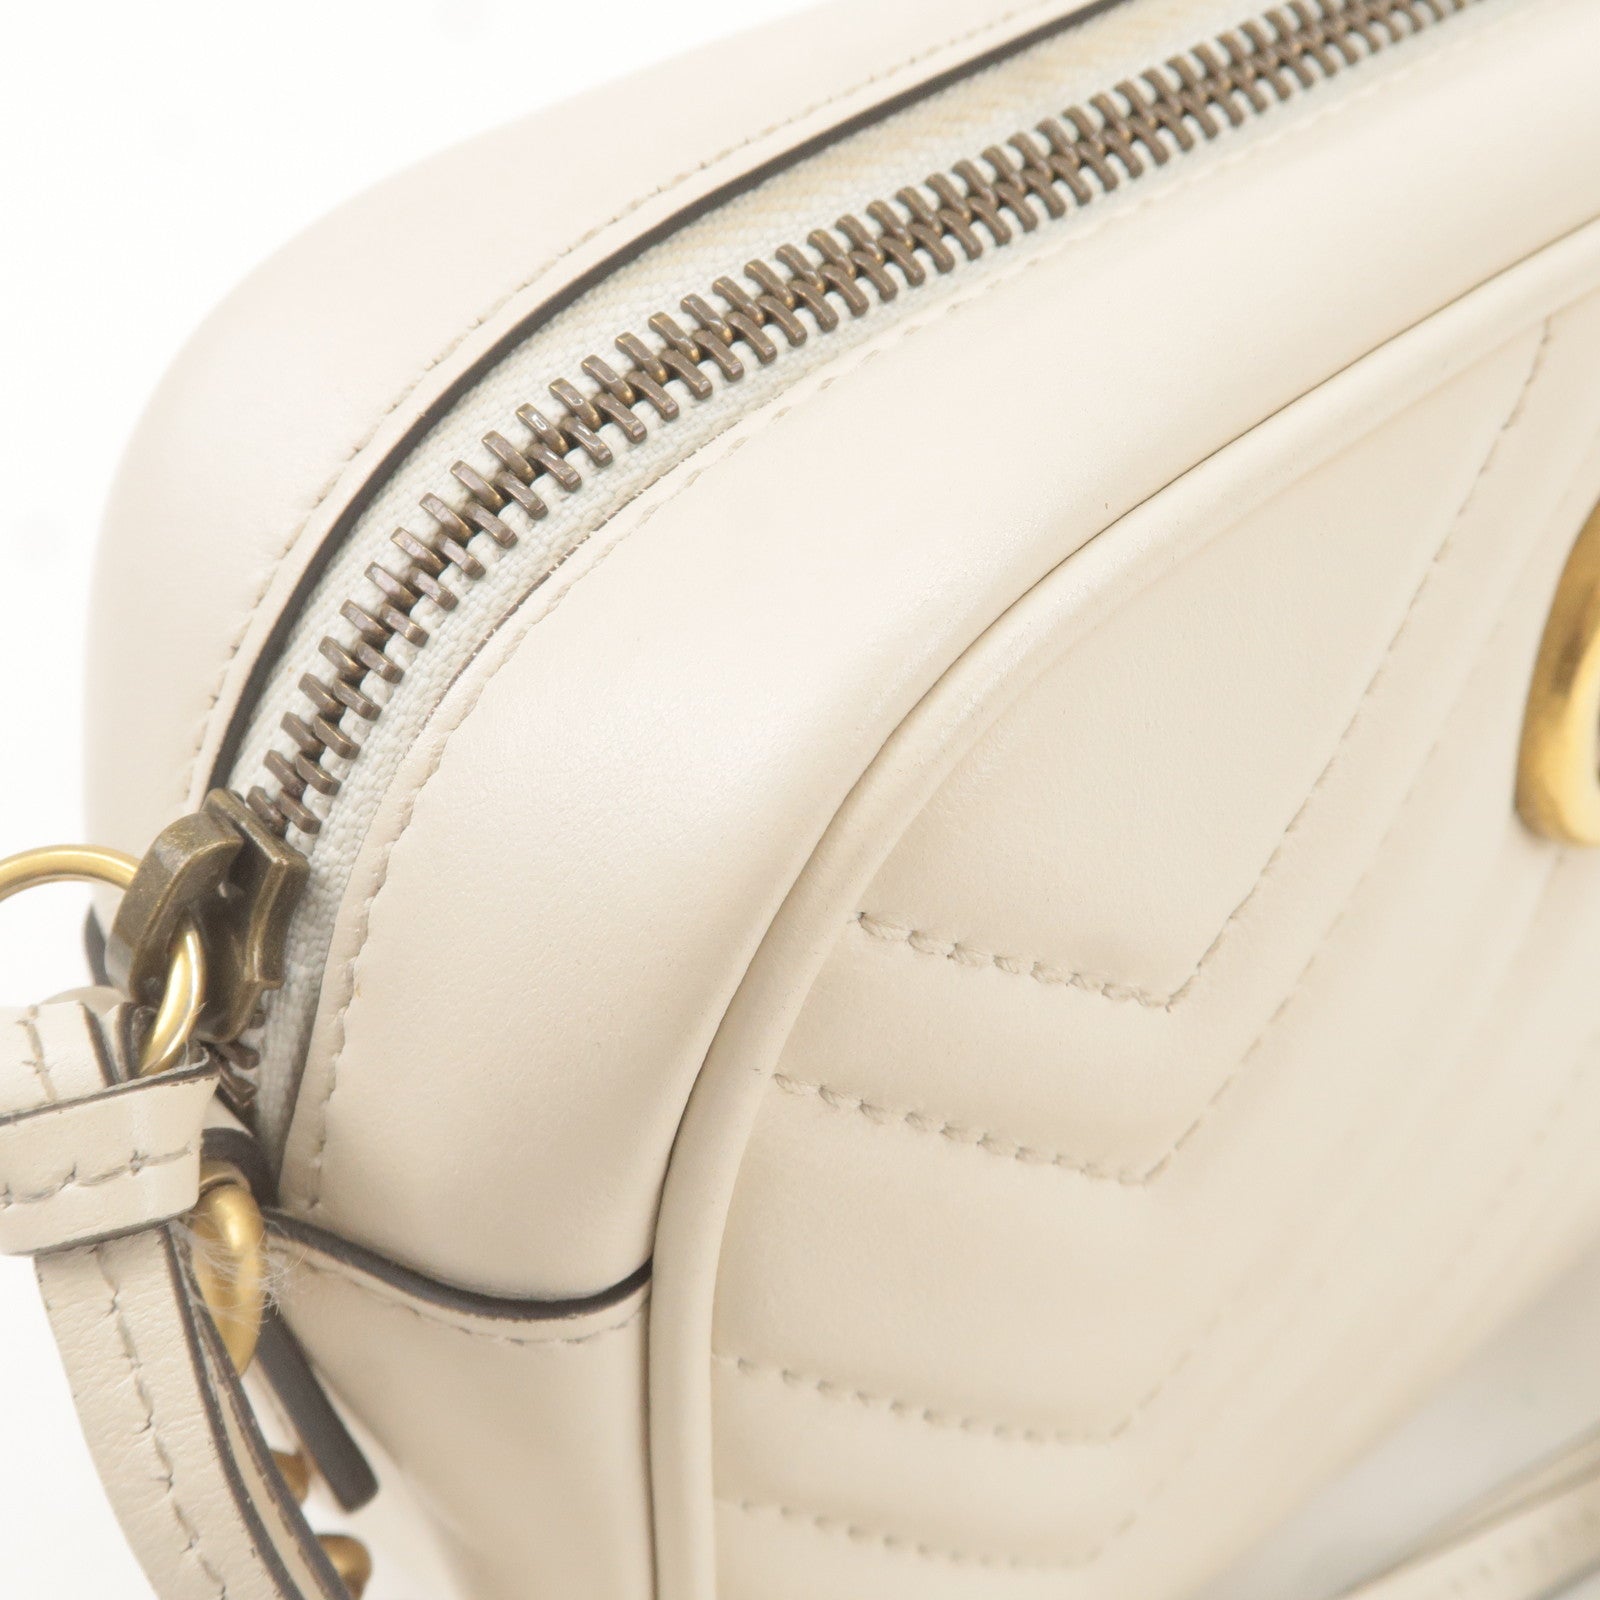 Gucci Marmont matelasse GG small ivory leather shoulder bag.